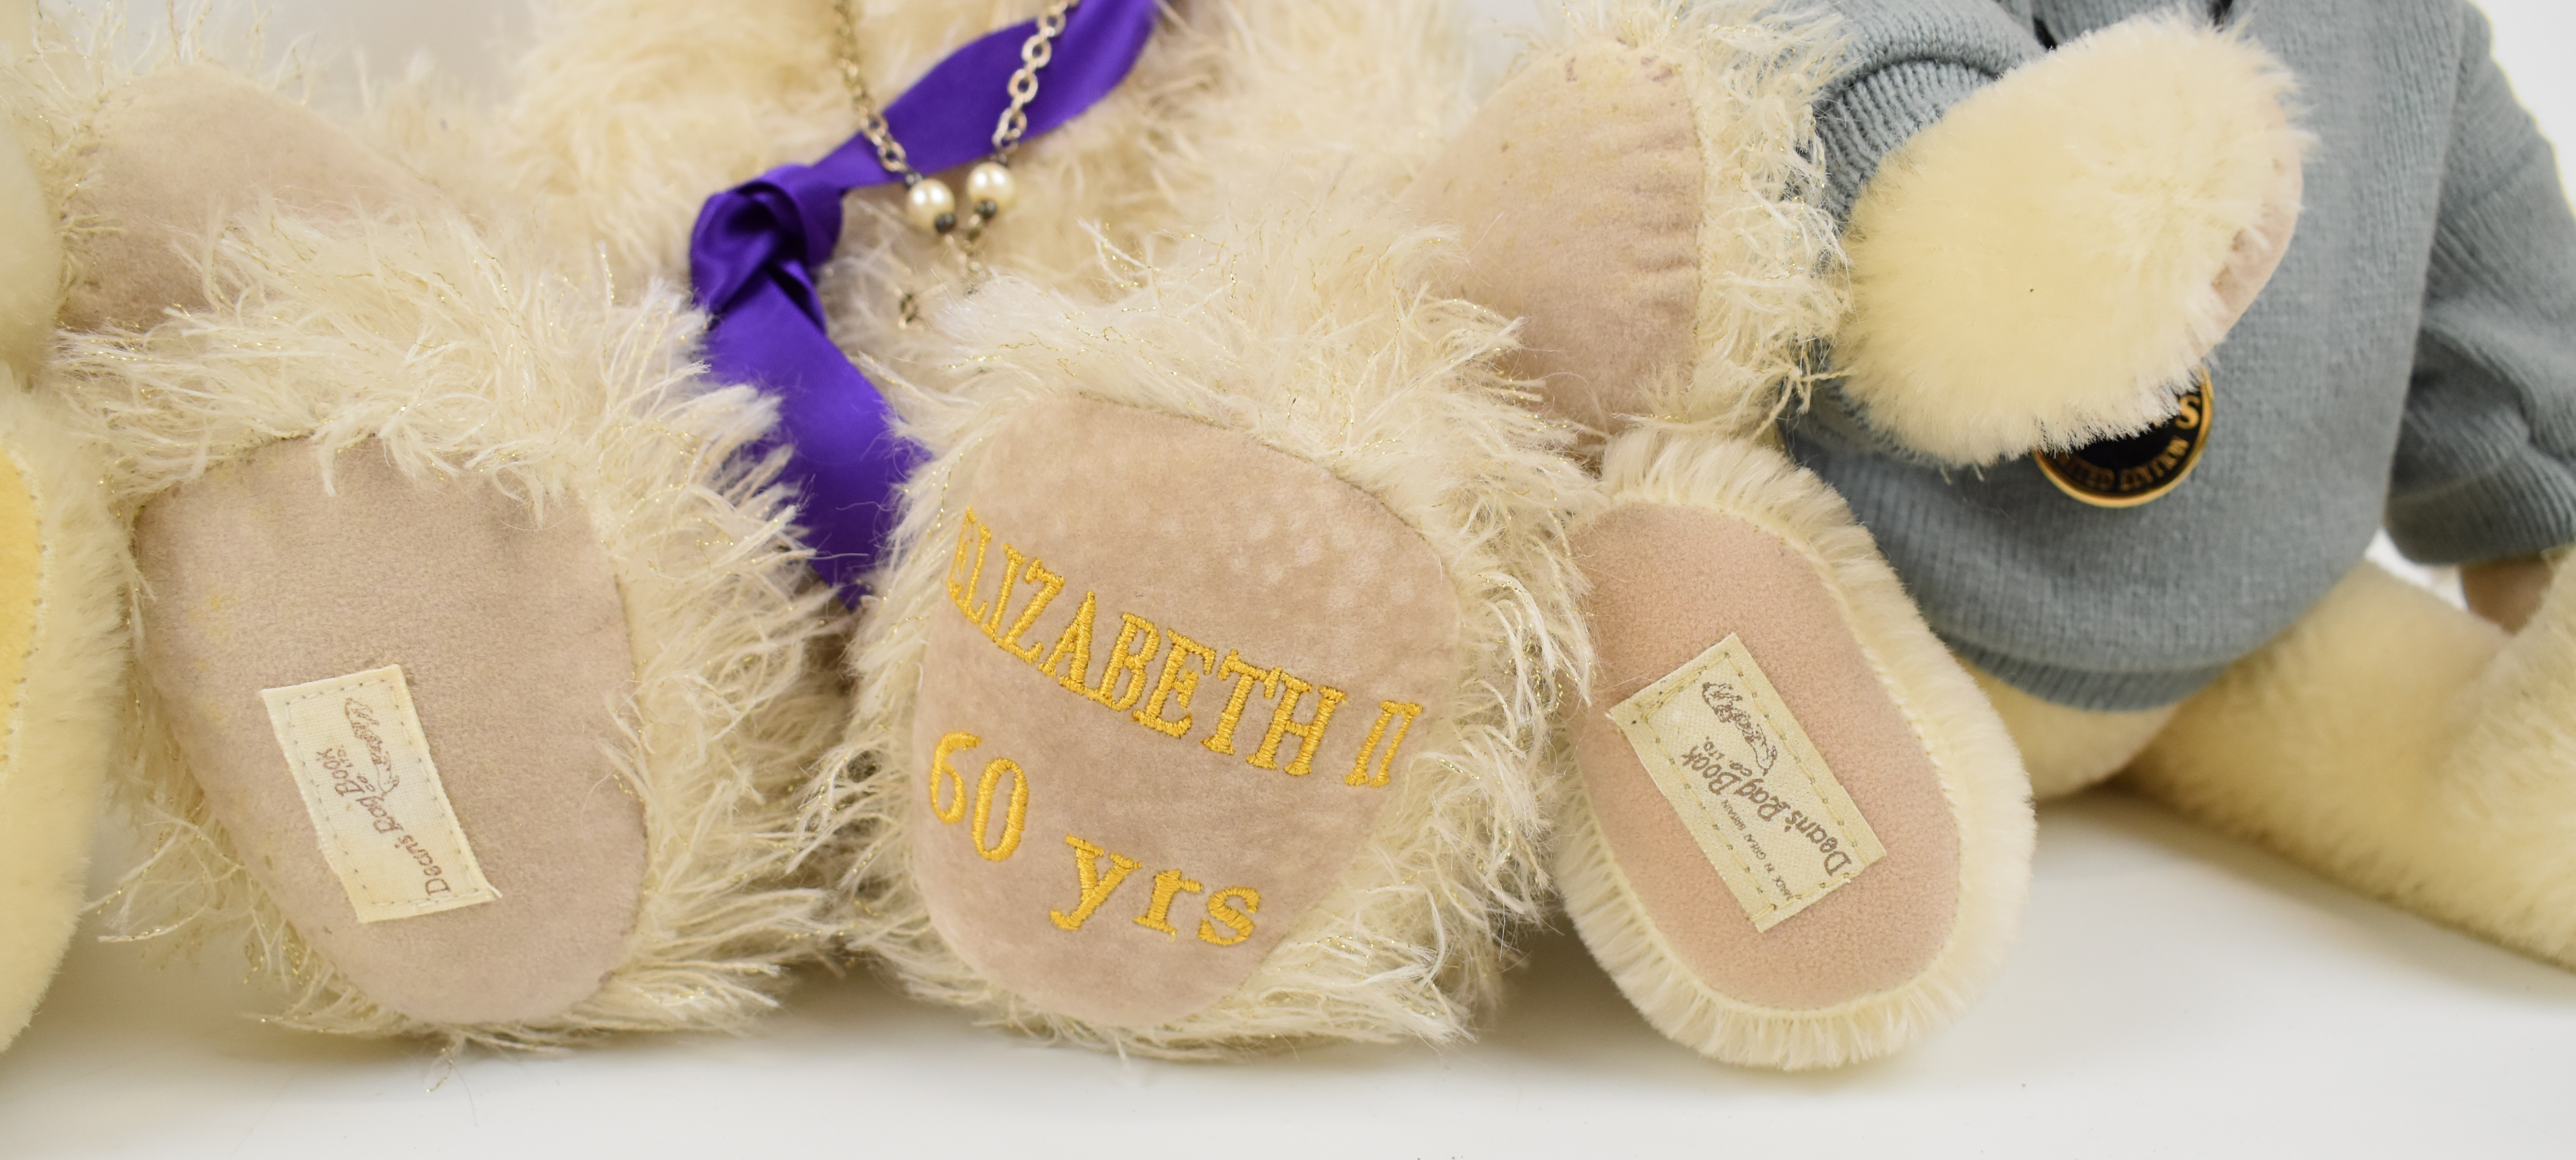 Thirteen Deans Rag Book limited edition Teddy bears, most with original tags and labels to include - Image 6 of 12